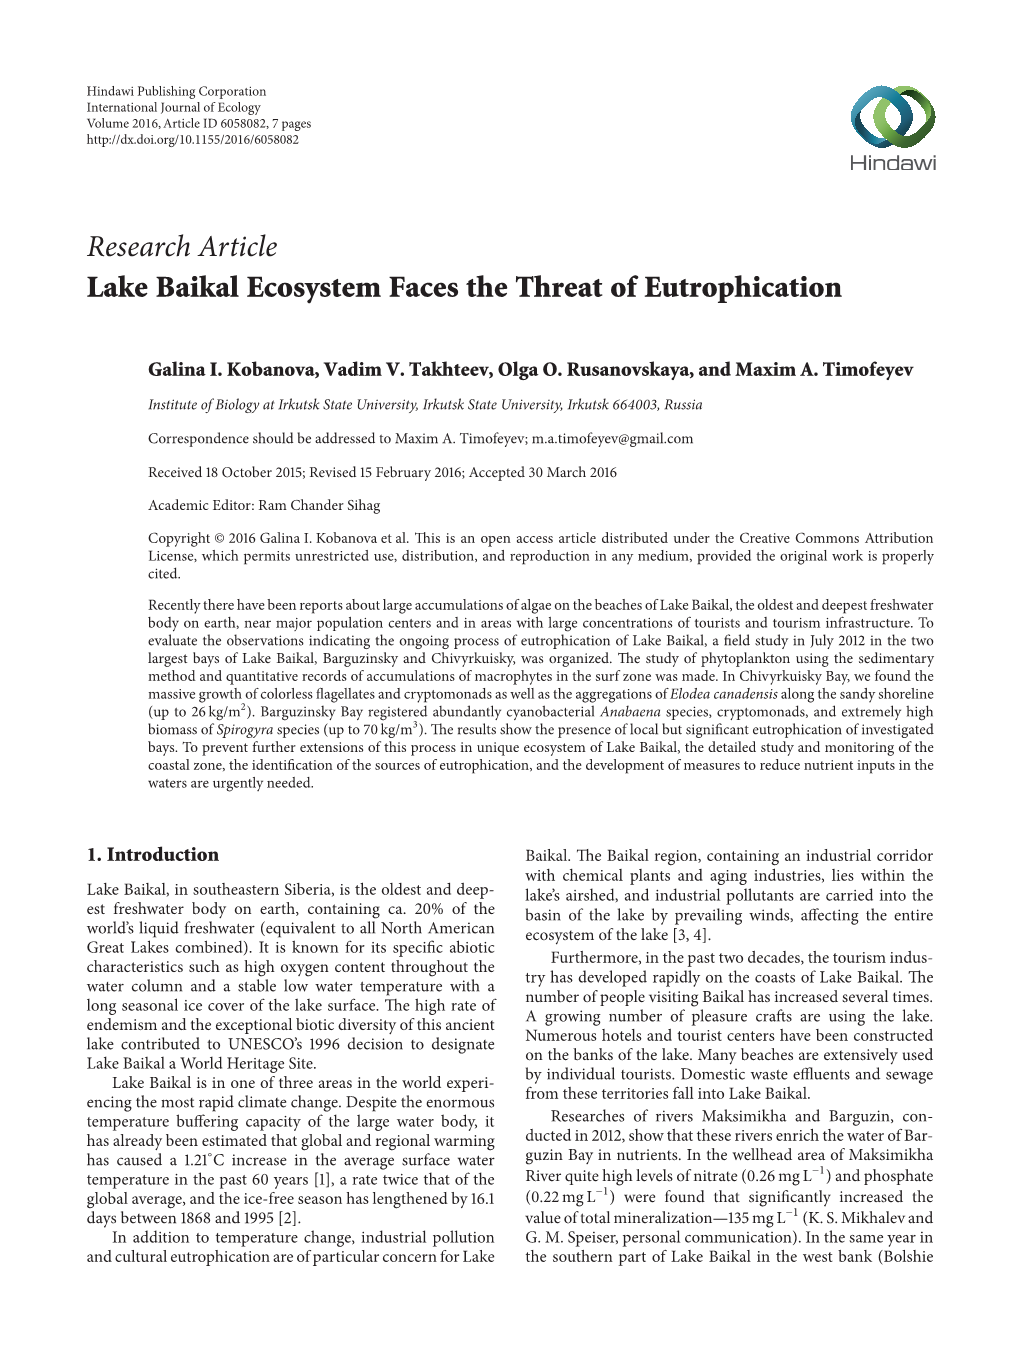 Research Article Lake Baikal Ecosystem Faces the Threat of Eutrophication